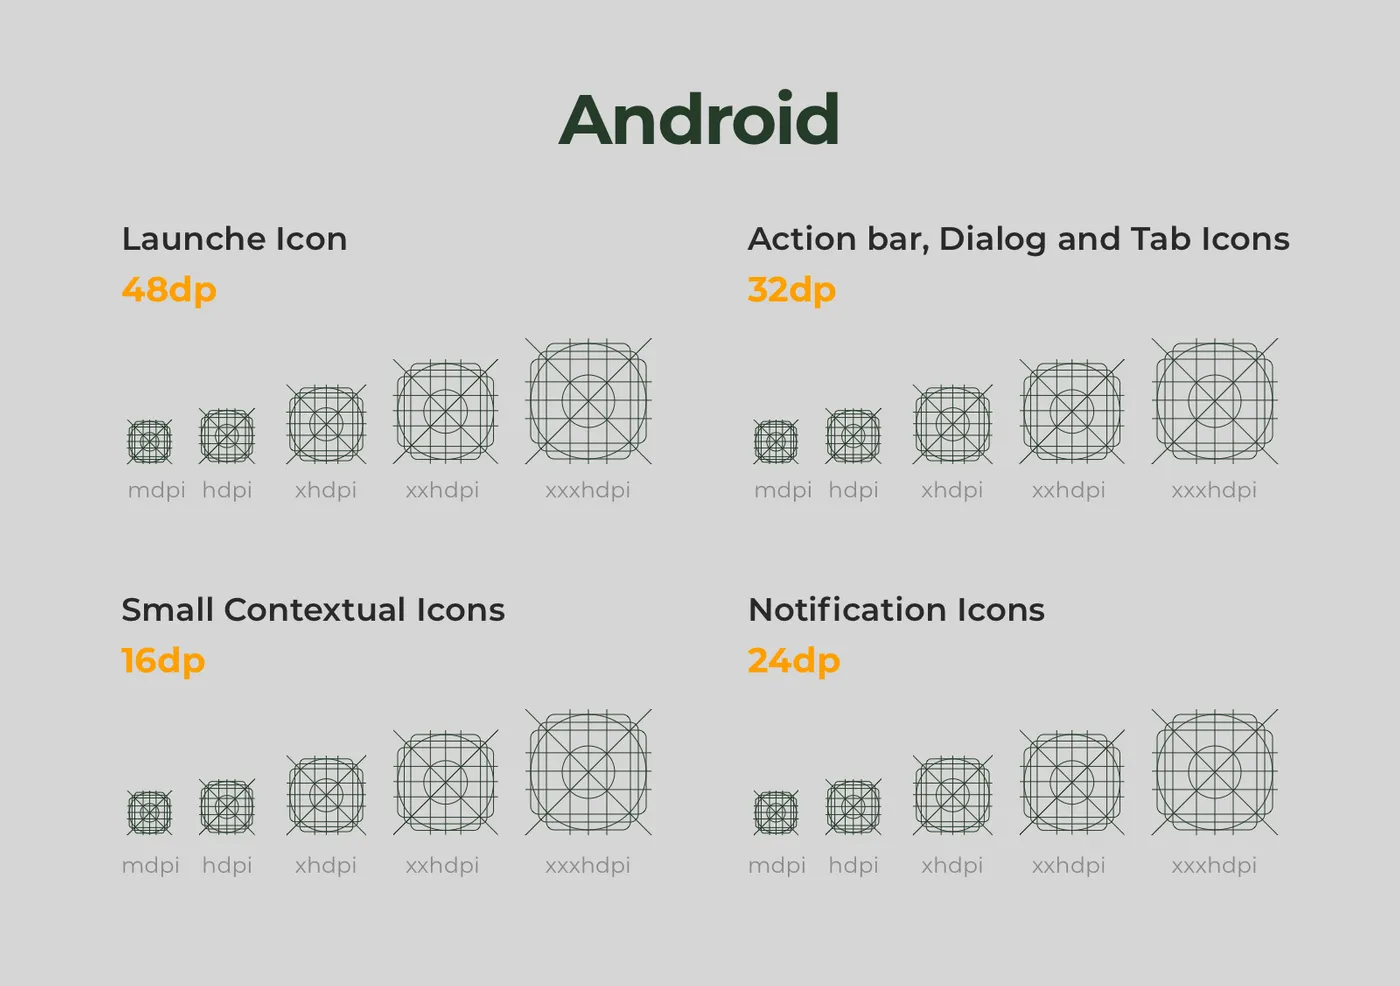 How to build an app for Android: Material design